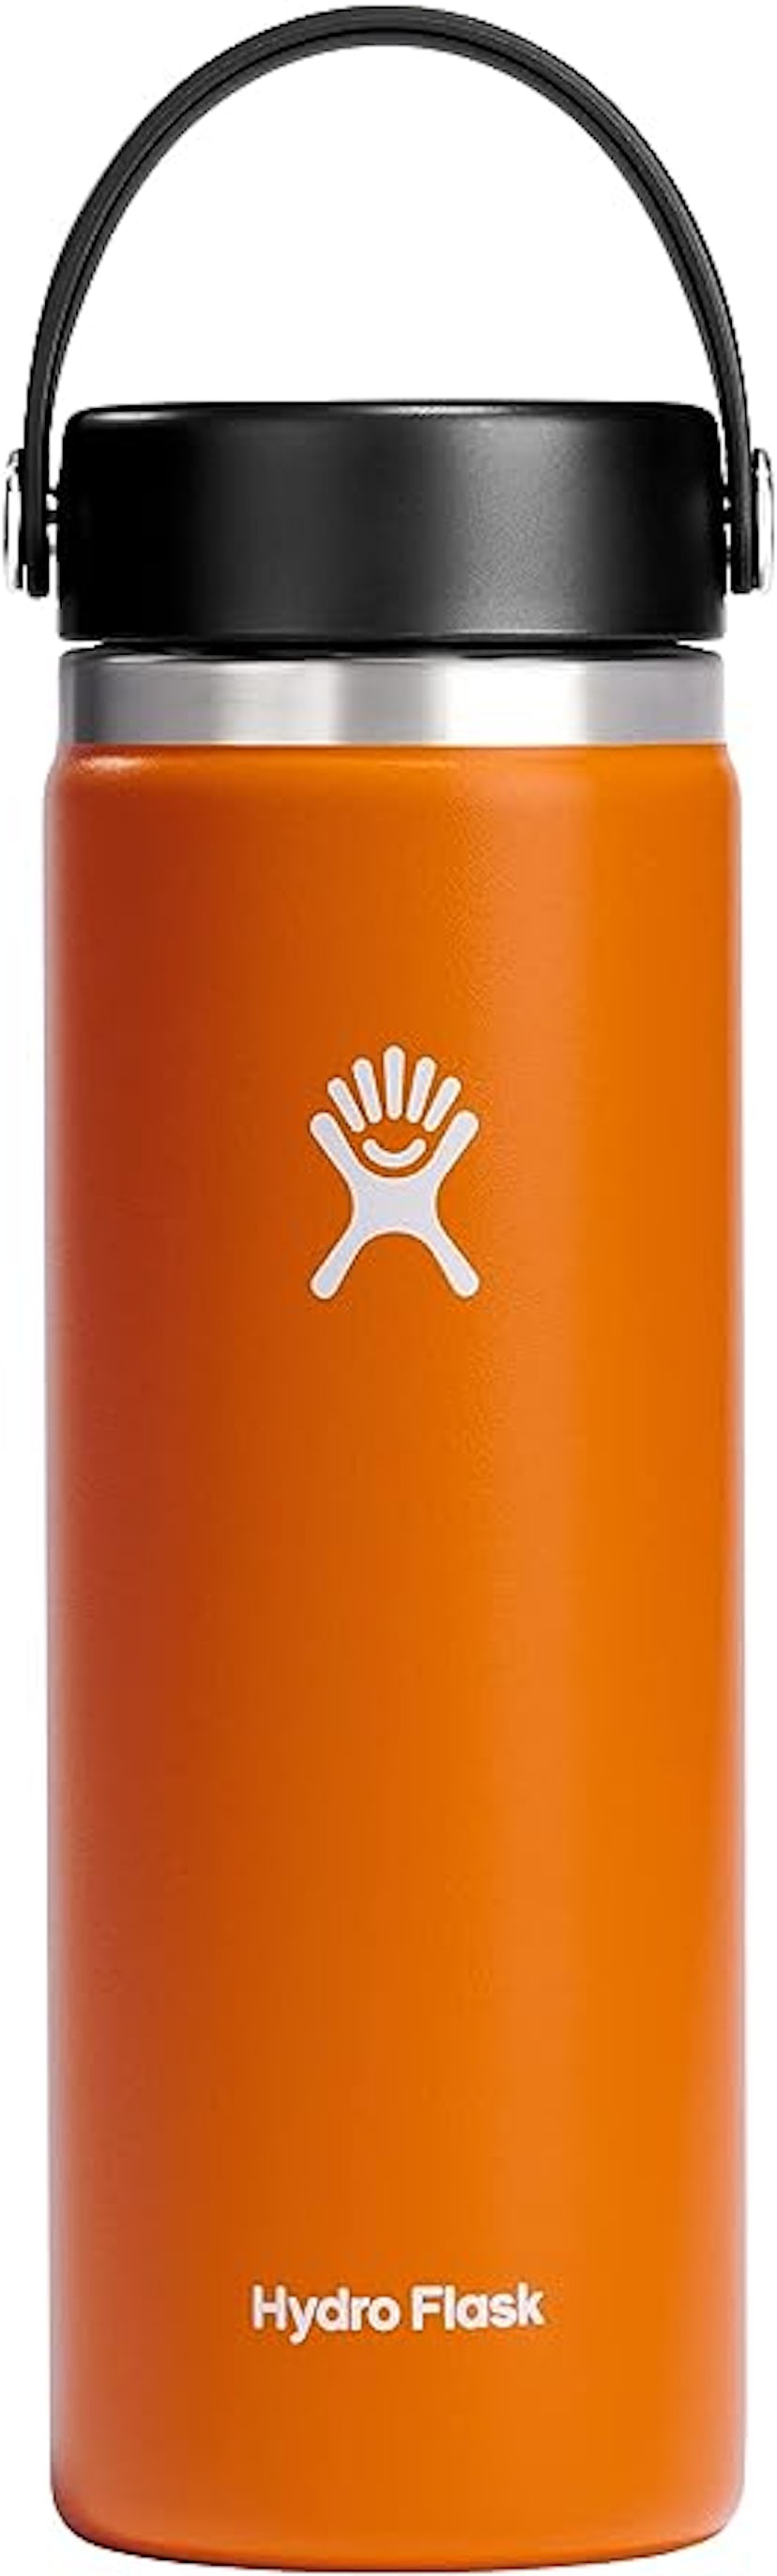 Hydroflask 20-oz. Stainless Steel Wide-Mouth Water Bottle 